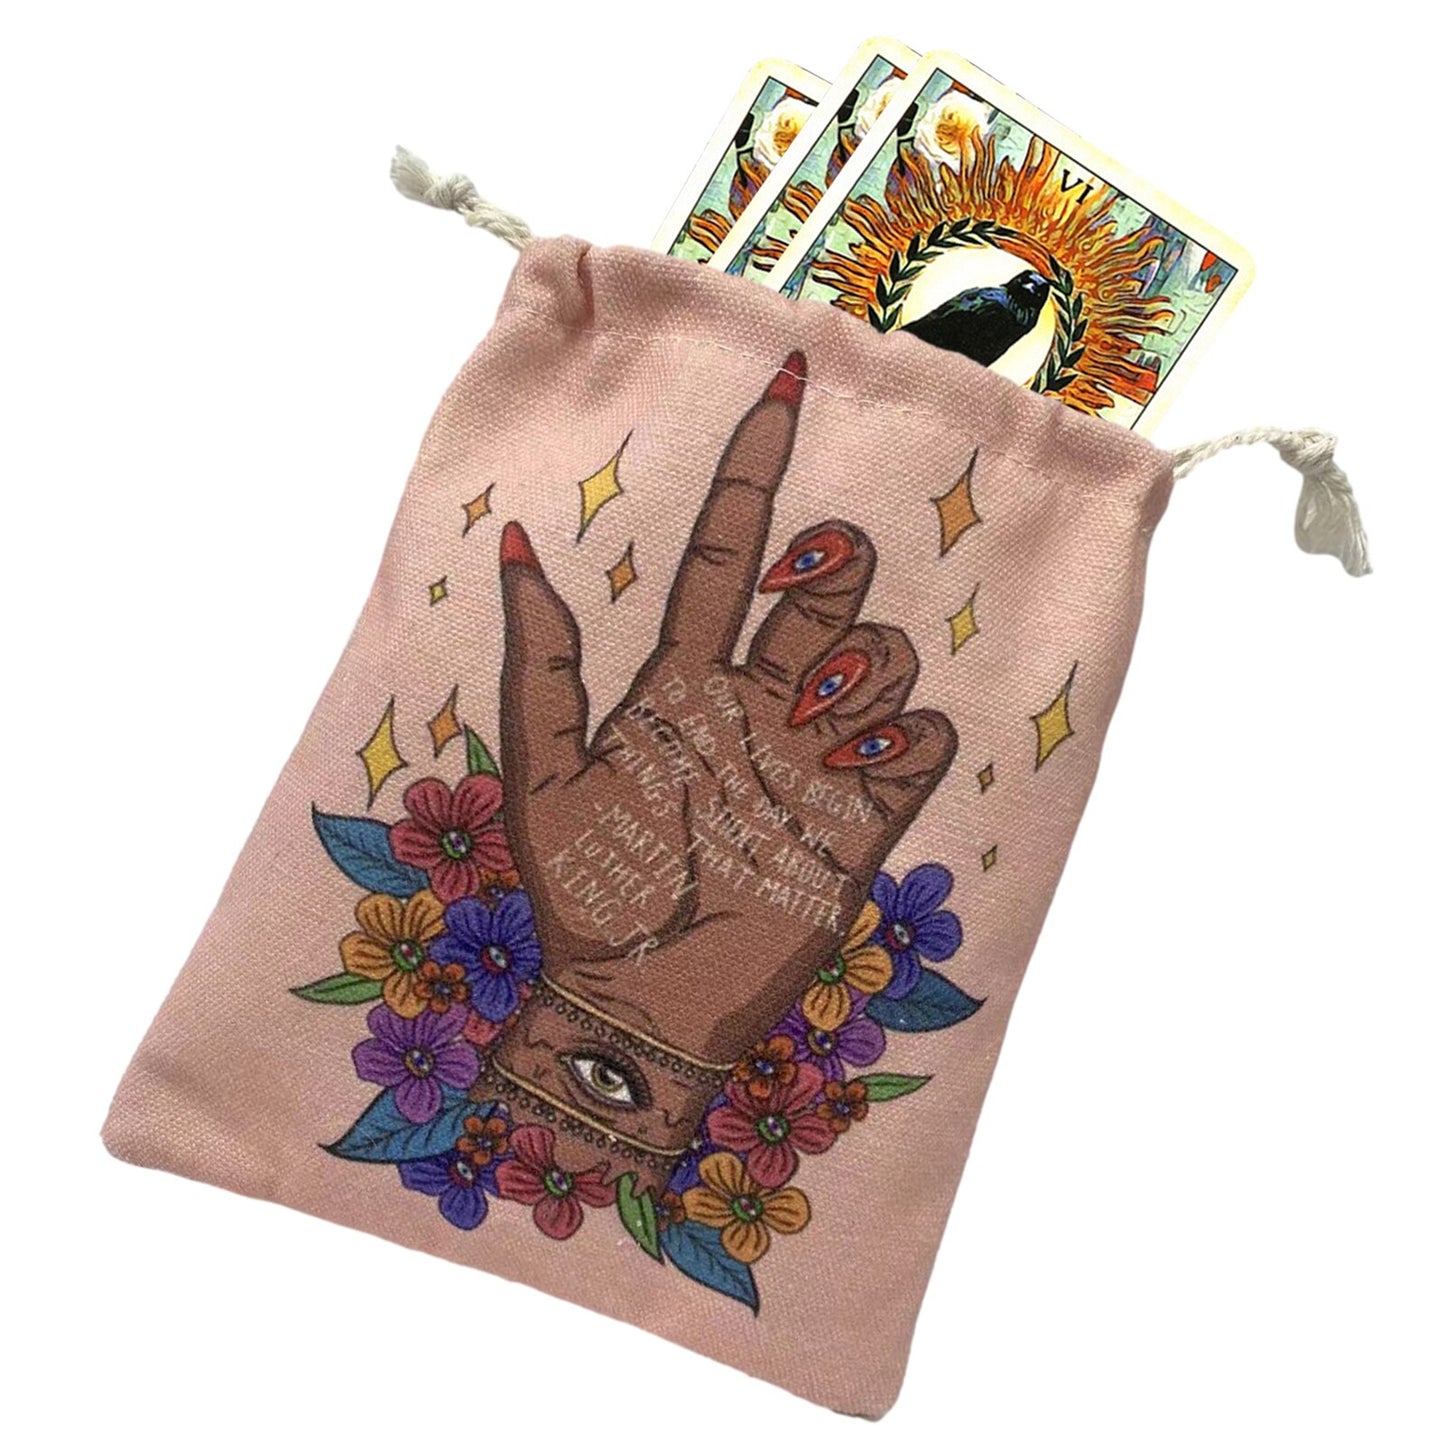 Eyes Hand Pattern Tarot Cards Storage Bag Tarot Card Deck Holder Pouch Drawstring Jewelry Board Games Dice Gift Bags Organizer